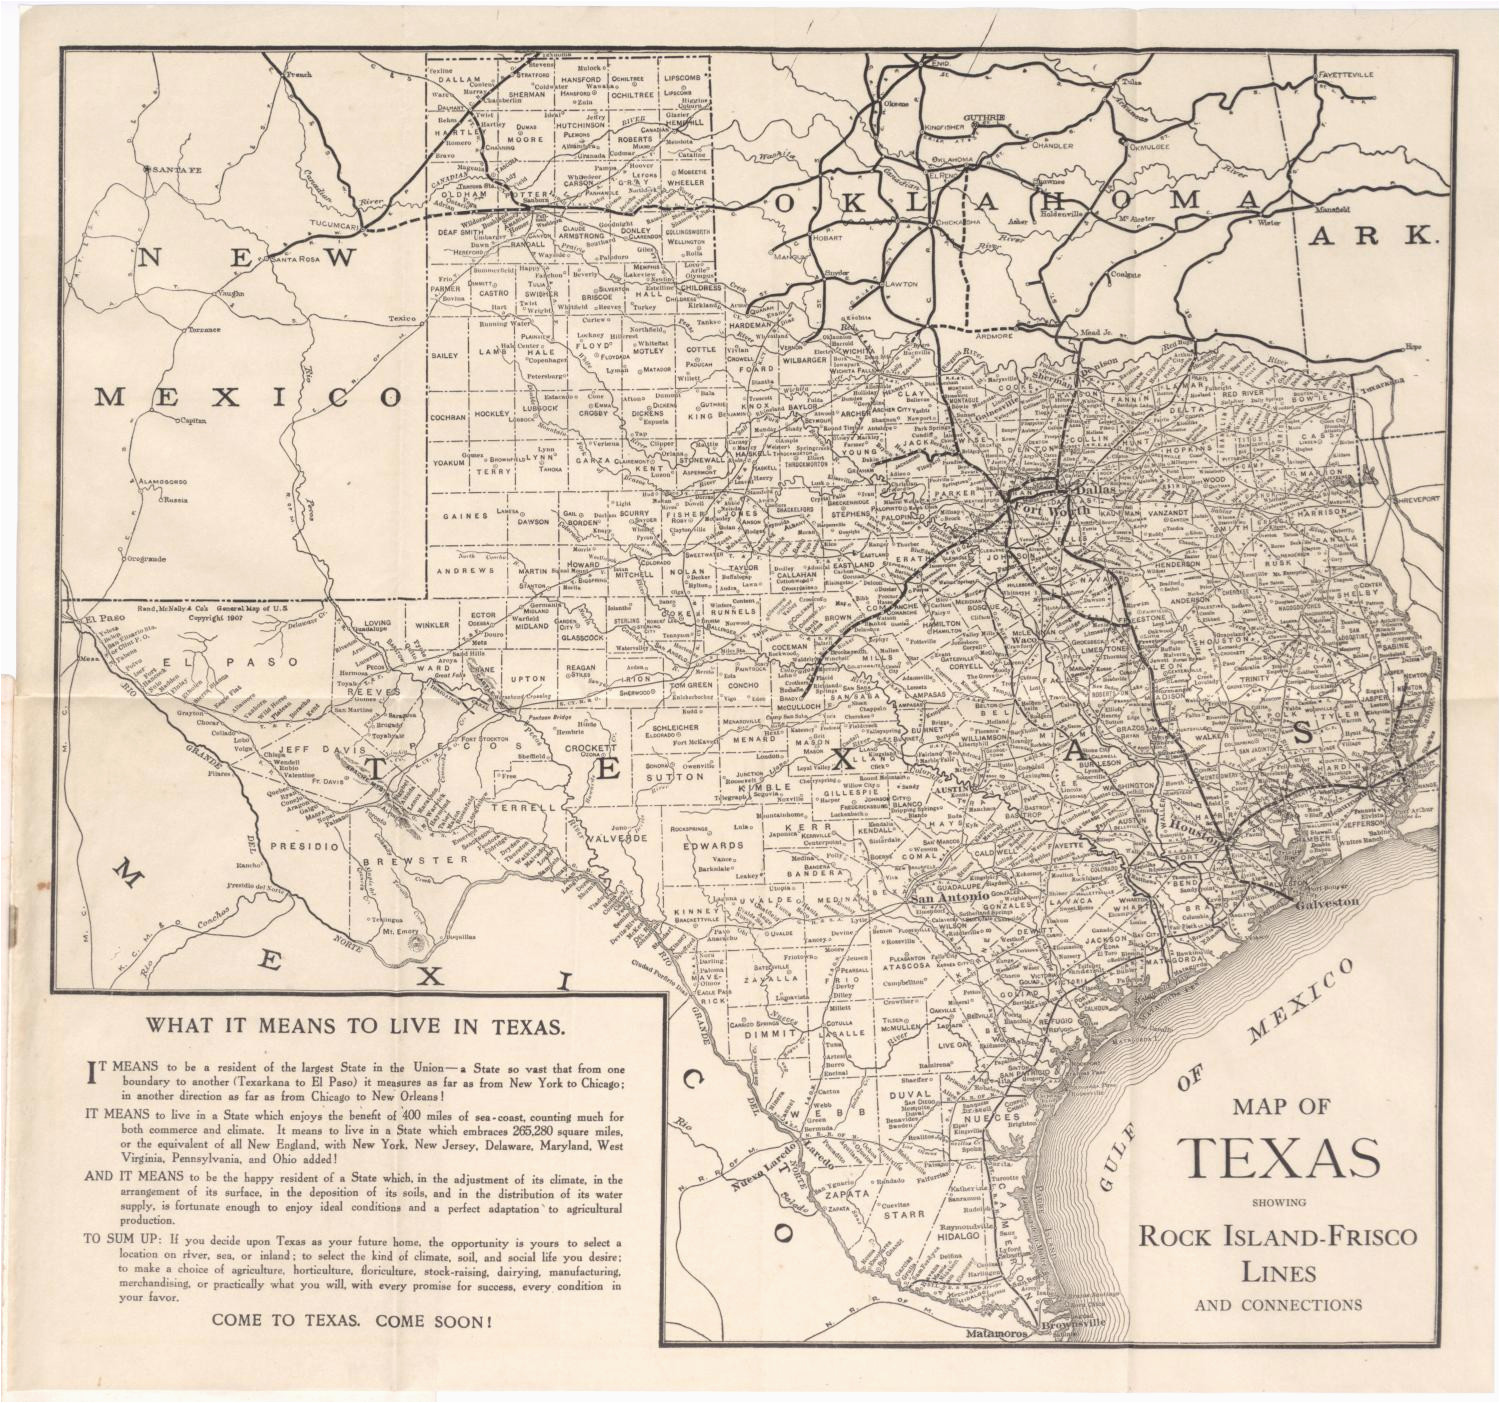 map of texas showing rock island frisco lones and connections side